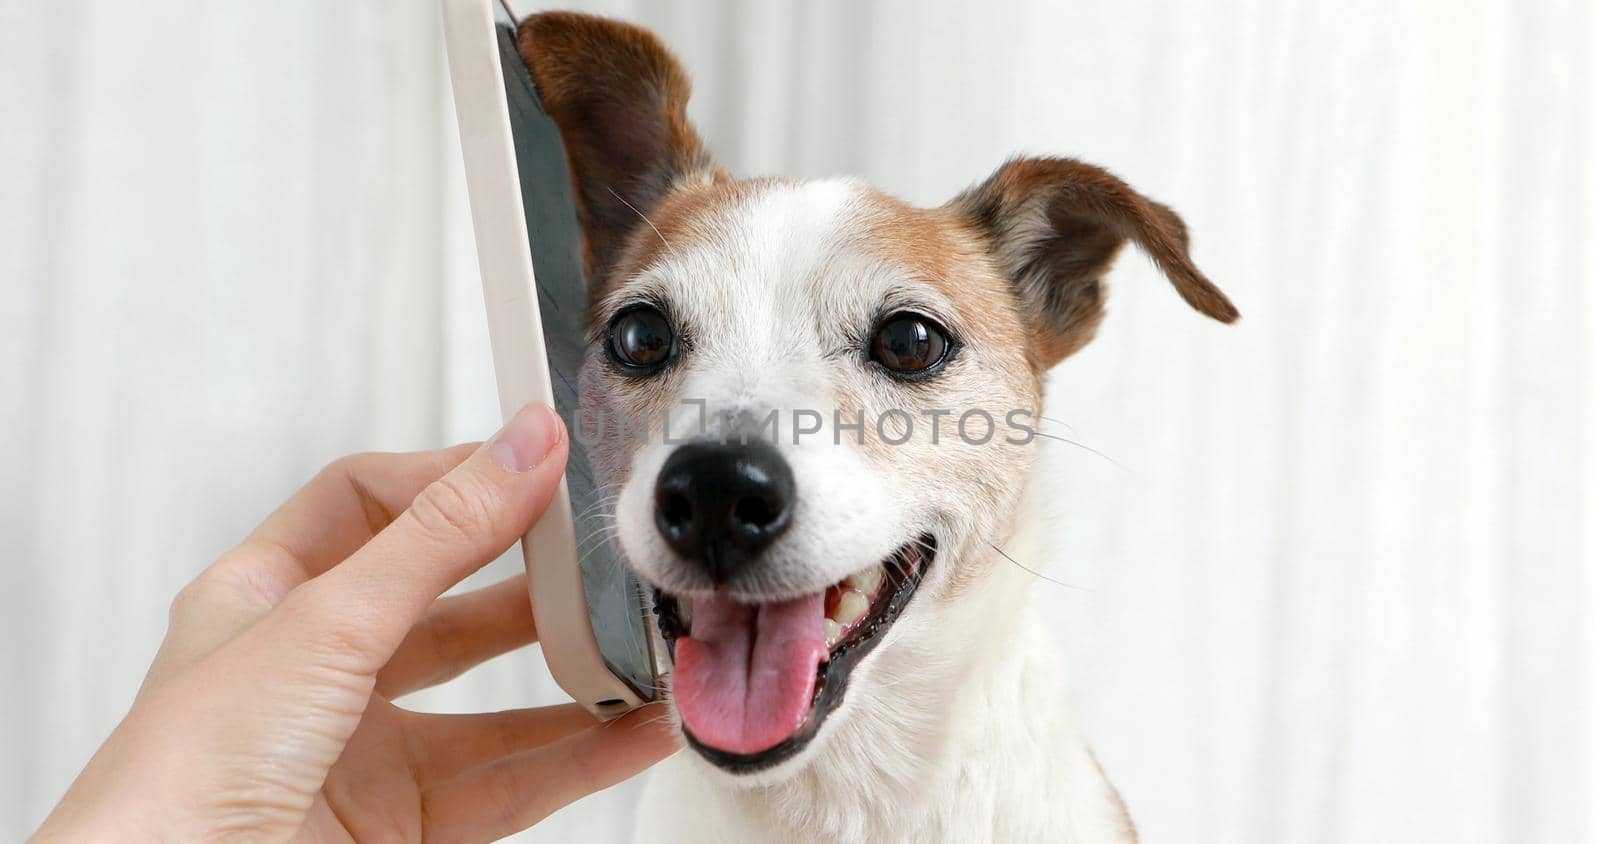 Portrait cute dog jack russell terrier with ear listening to smartphone with owner and smiling white background close-up